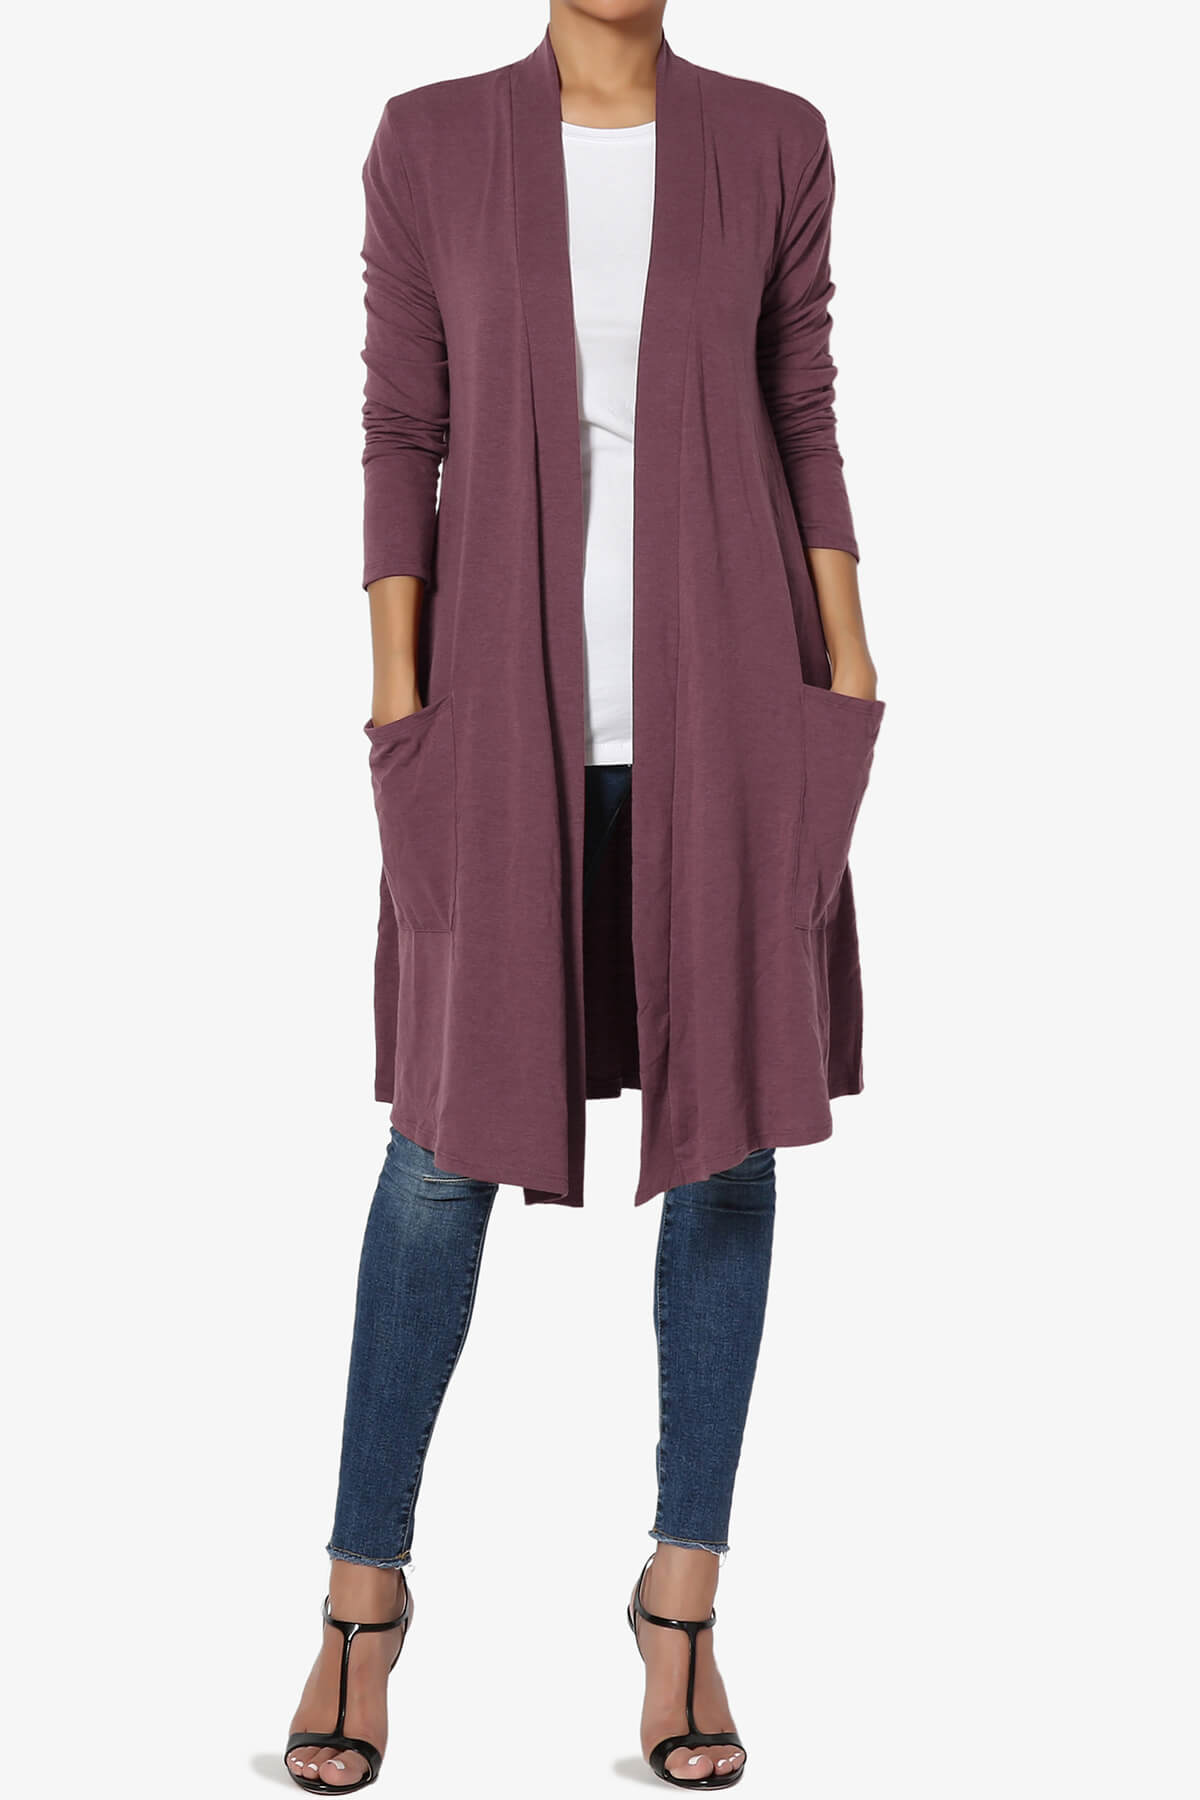 Load image into Gallery viewer, Daday Pocket Jersey Knee Length Cardigan DUSTY PLUM_6
